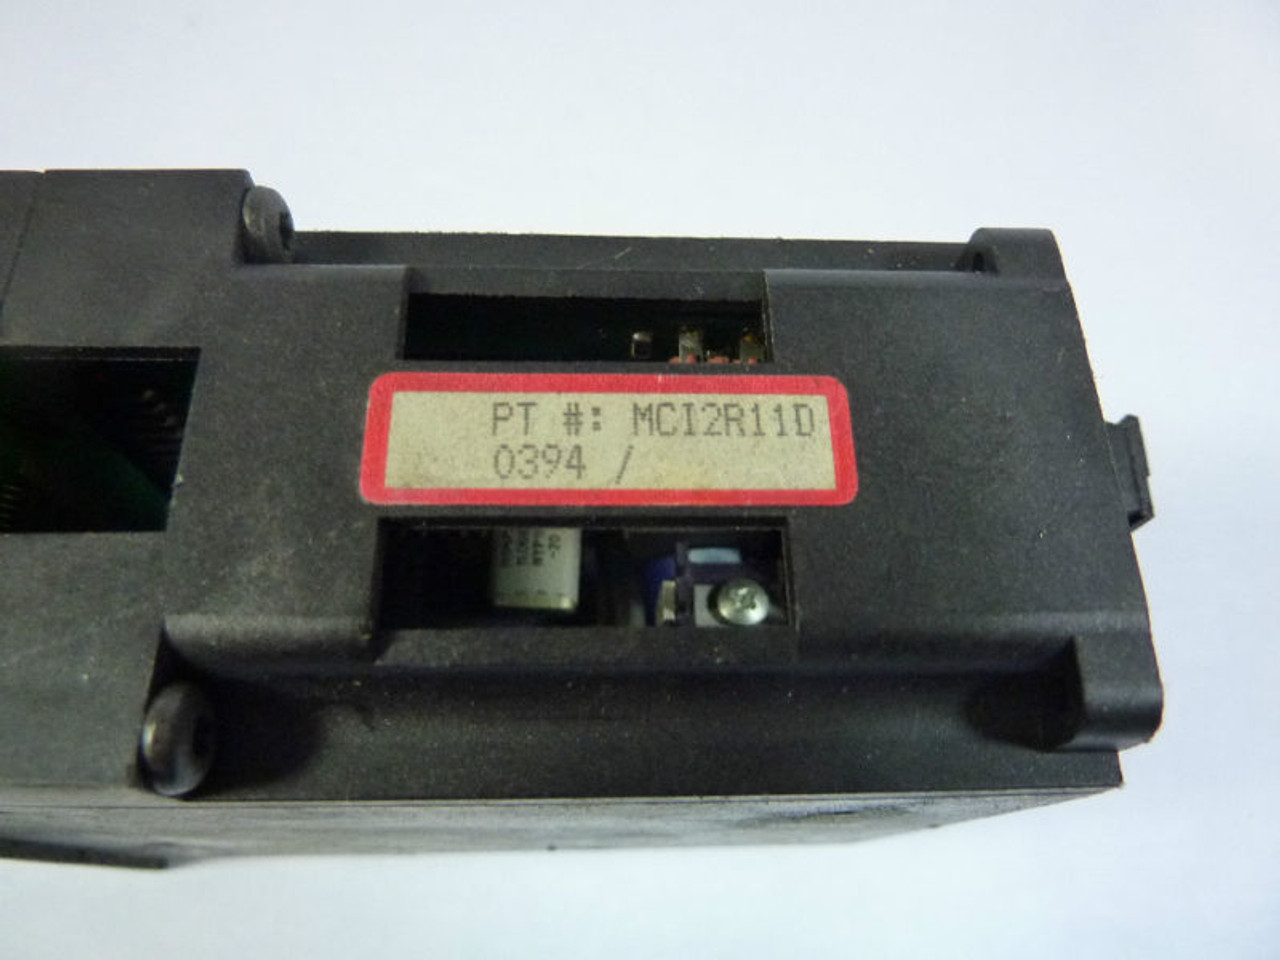 Red Lion MCI2R11D Message Center Panel Meter USED